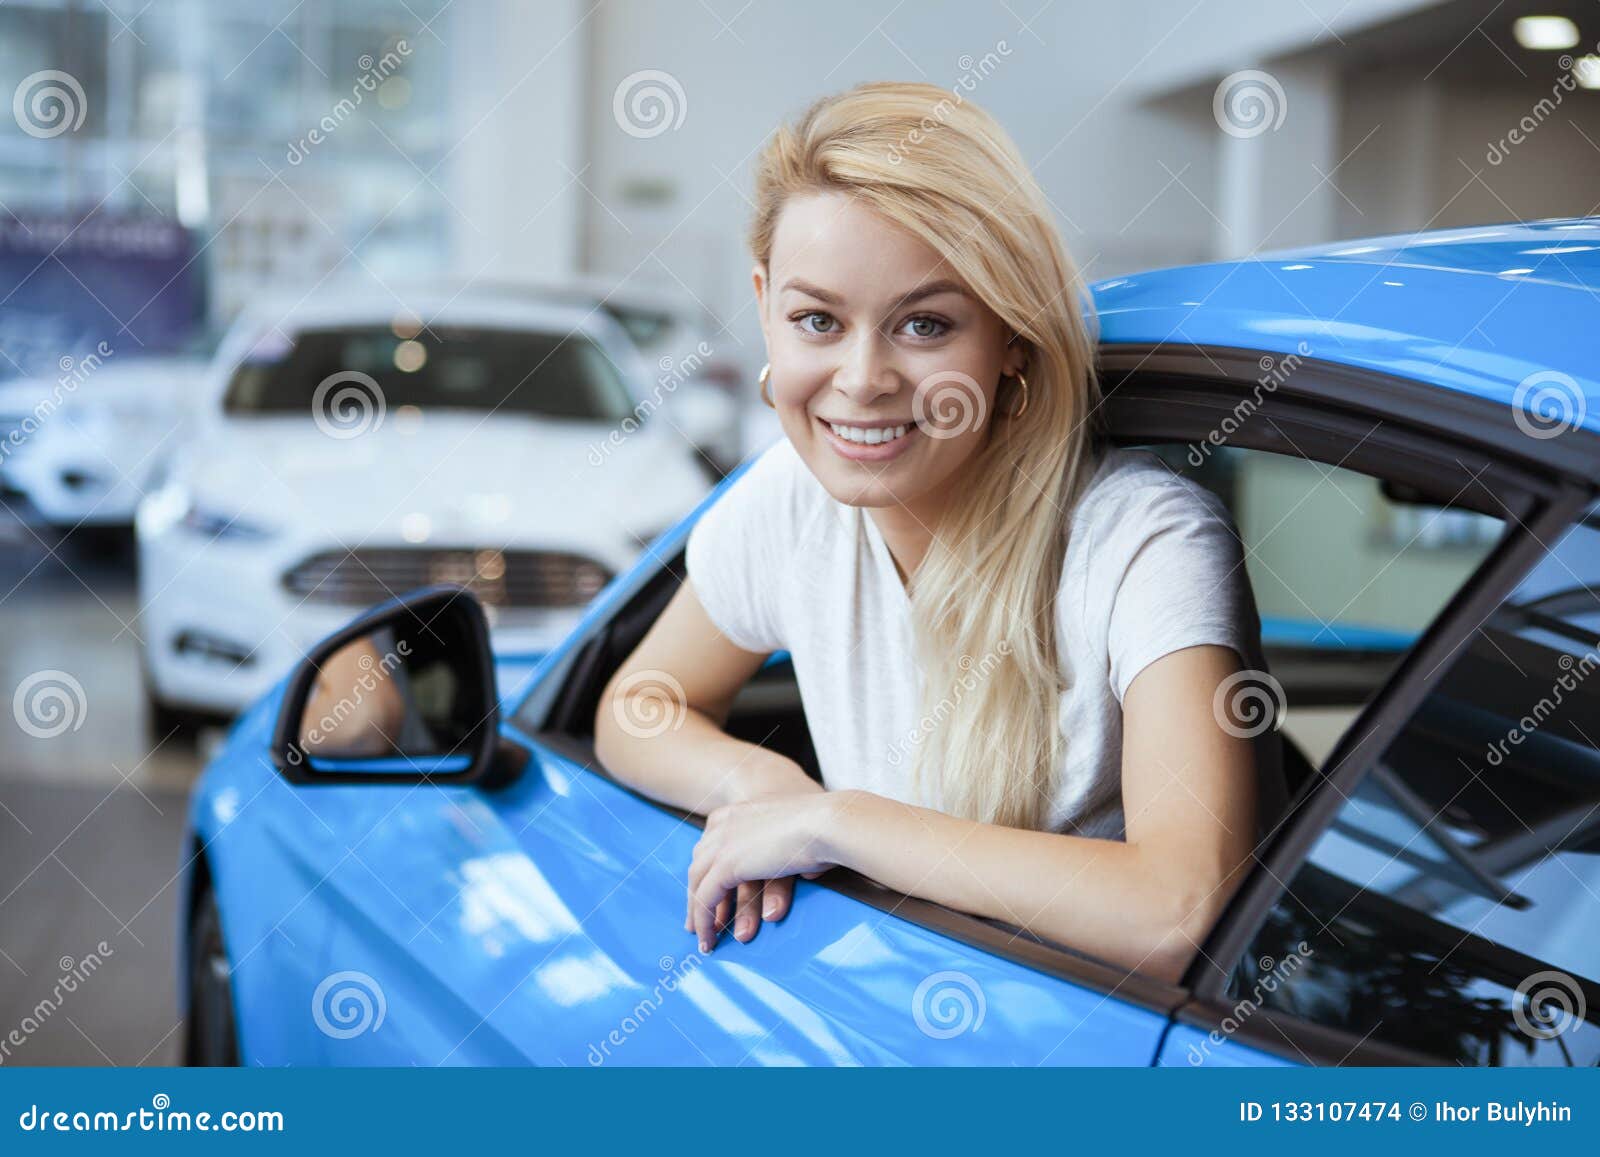 Beautiful Young Woman Buying New Car at the Dealership Stock Photo ...